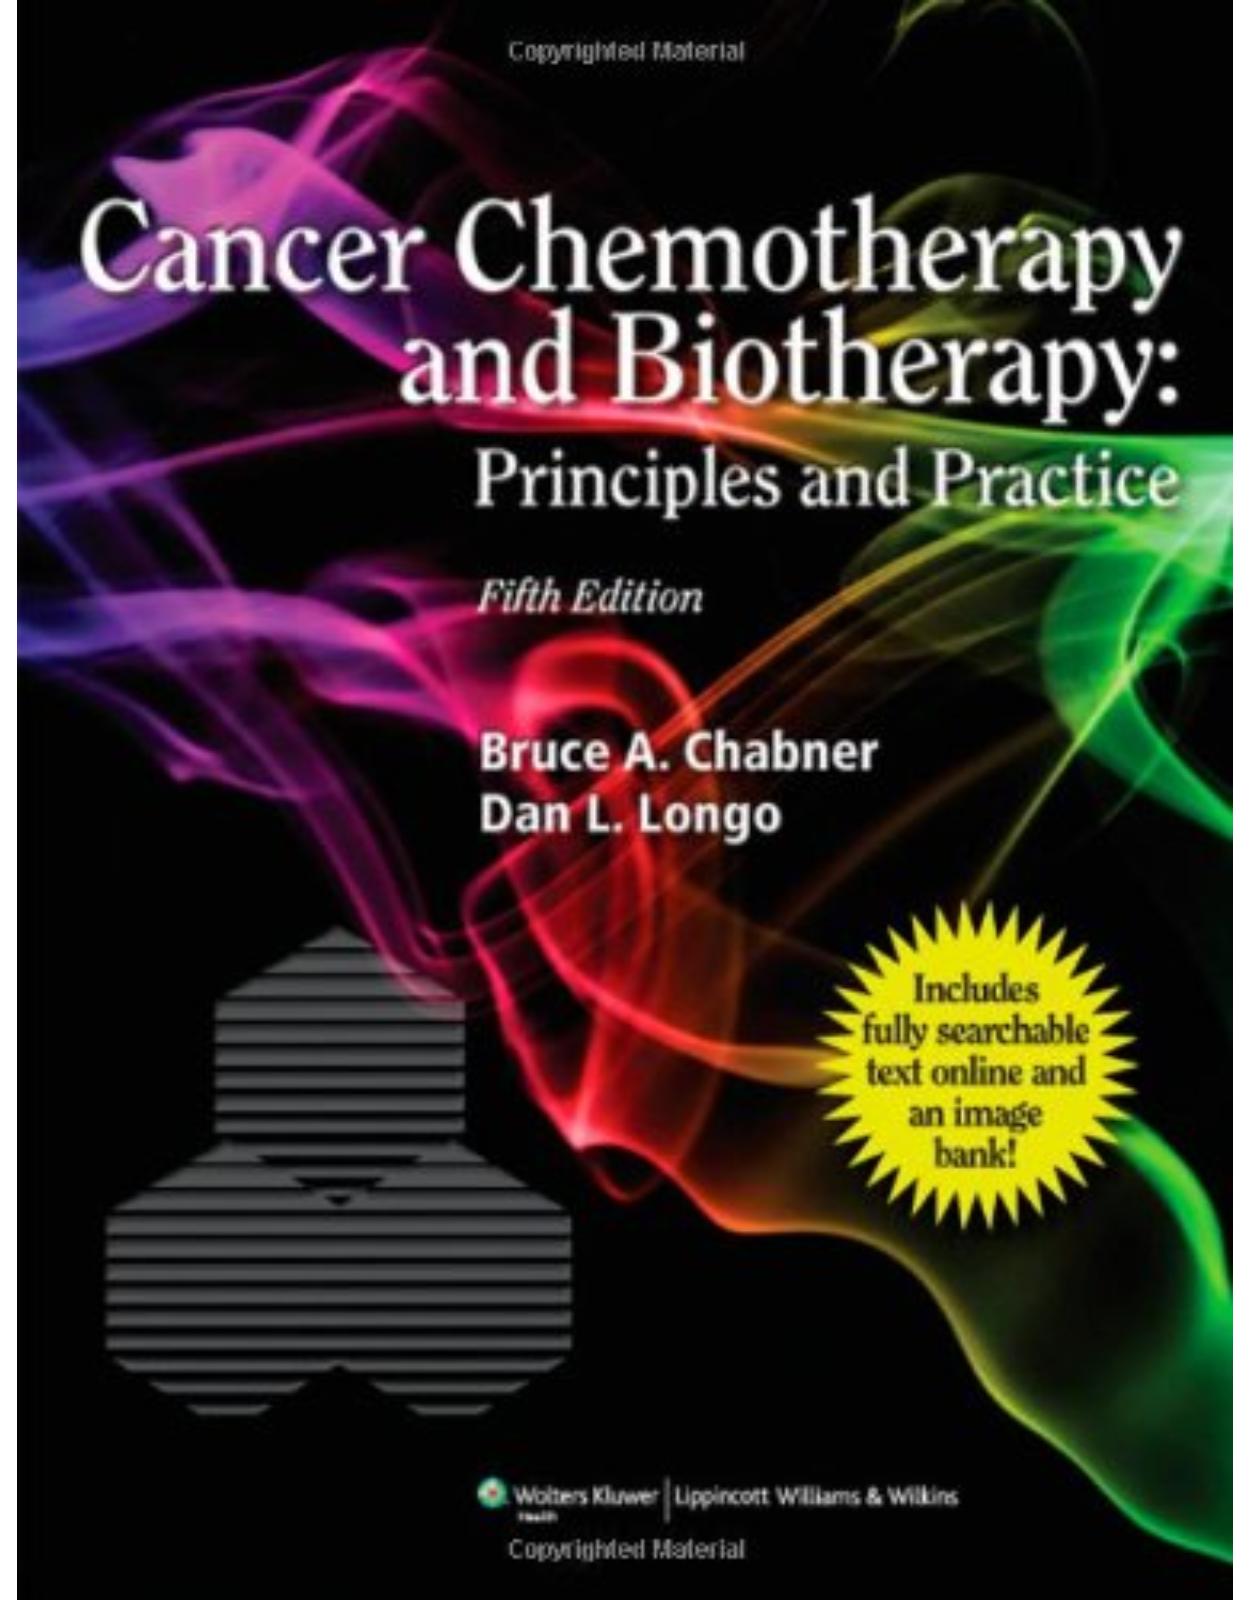 Cancer Chemotherapy and Biotherapy: Principles and Practice (Chabner, Cancer Chemotherapy and Biotherapy) 